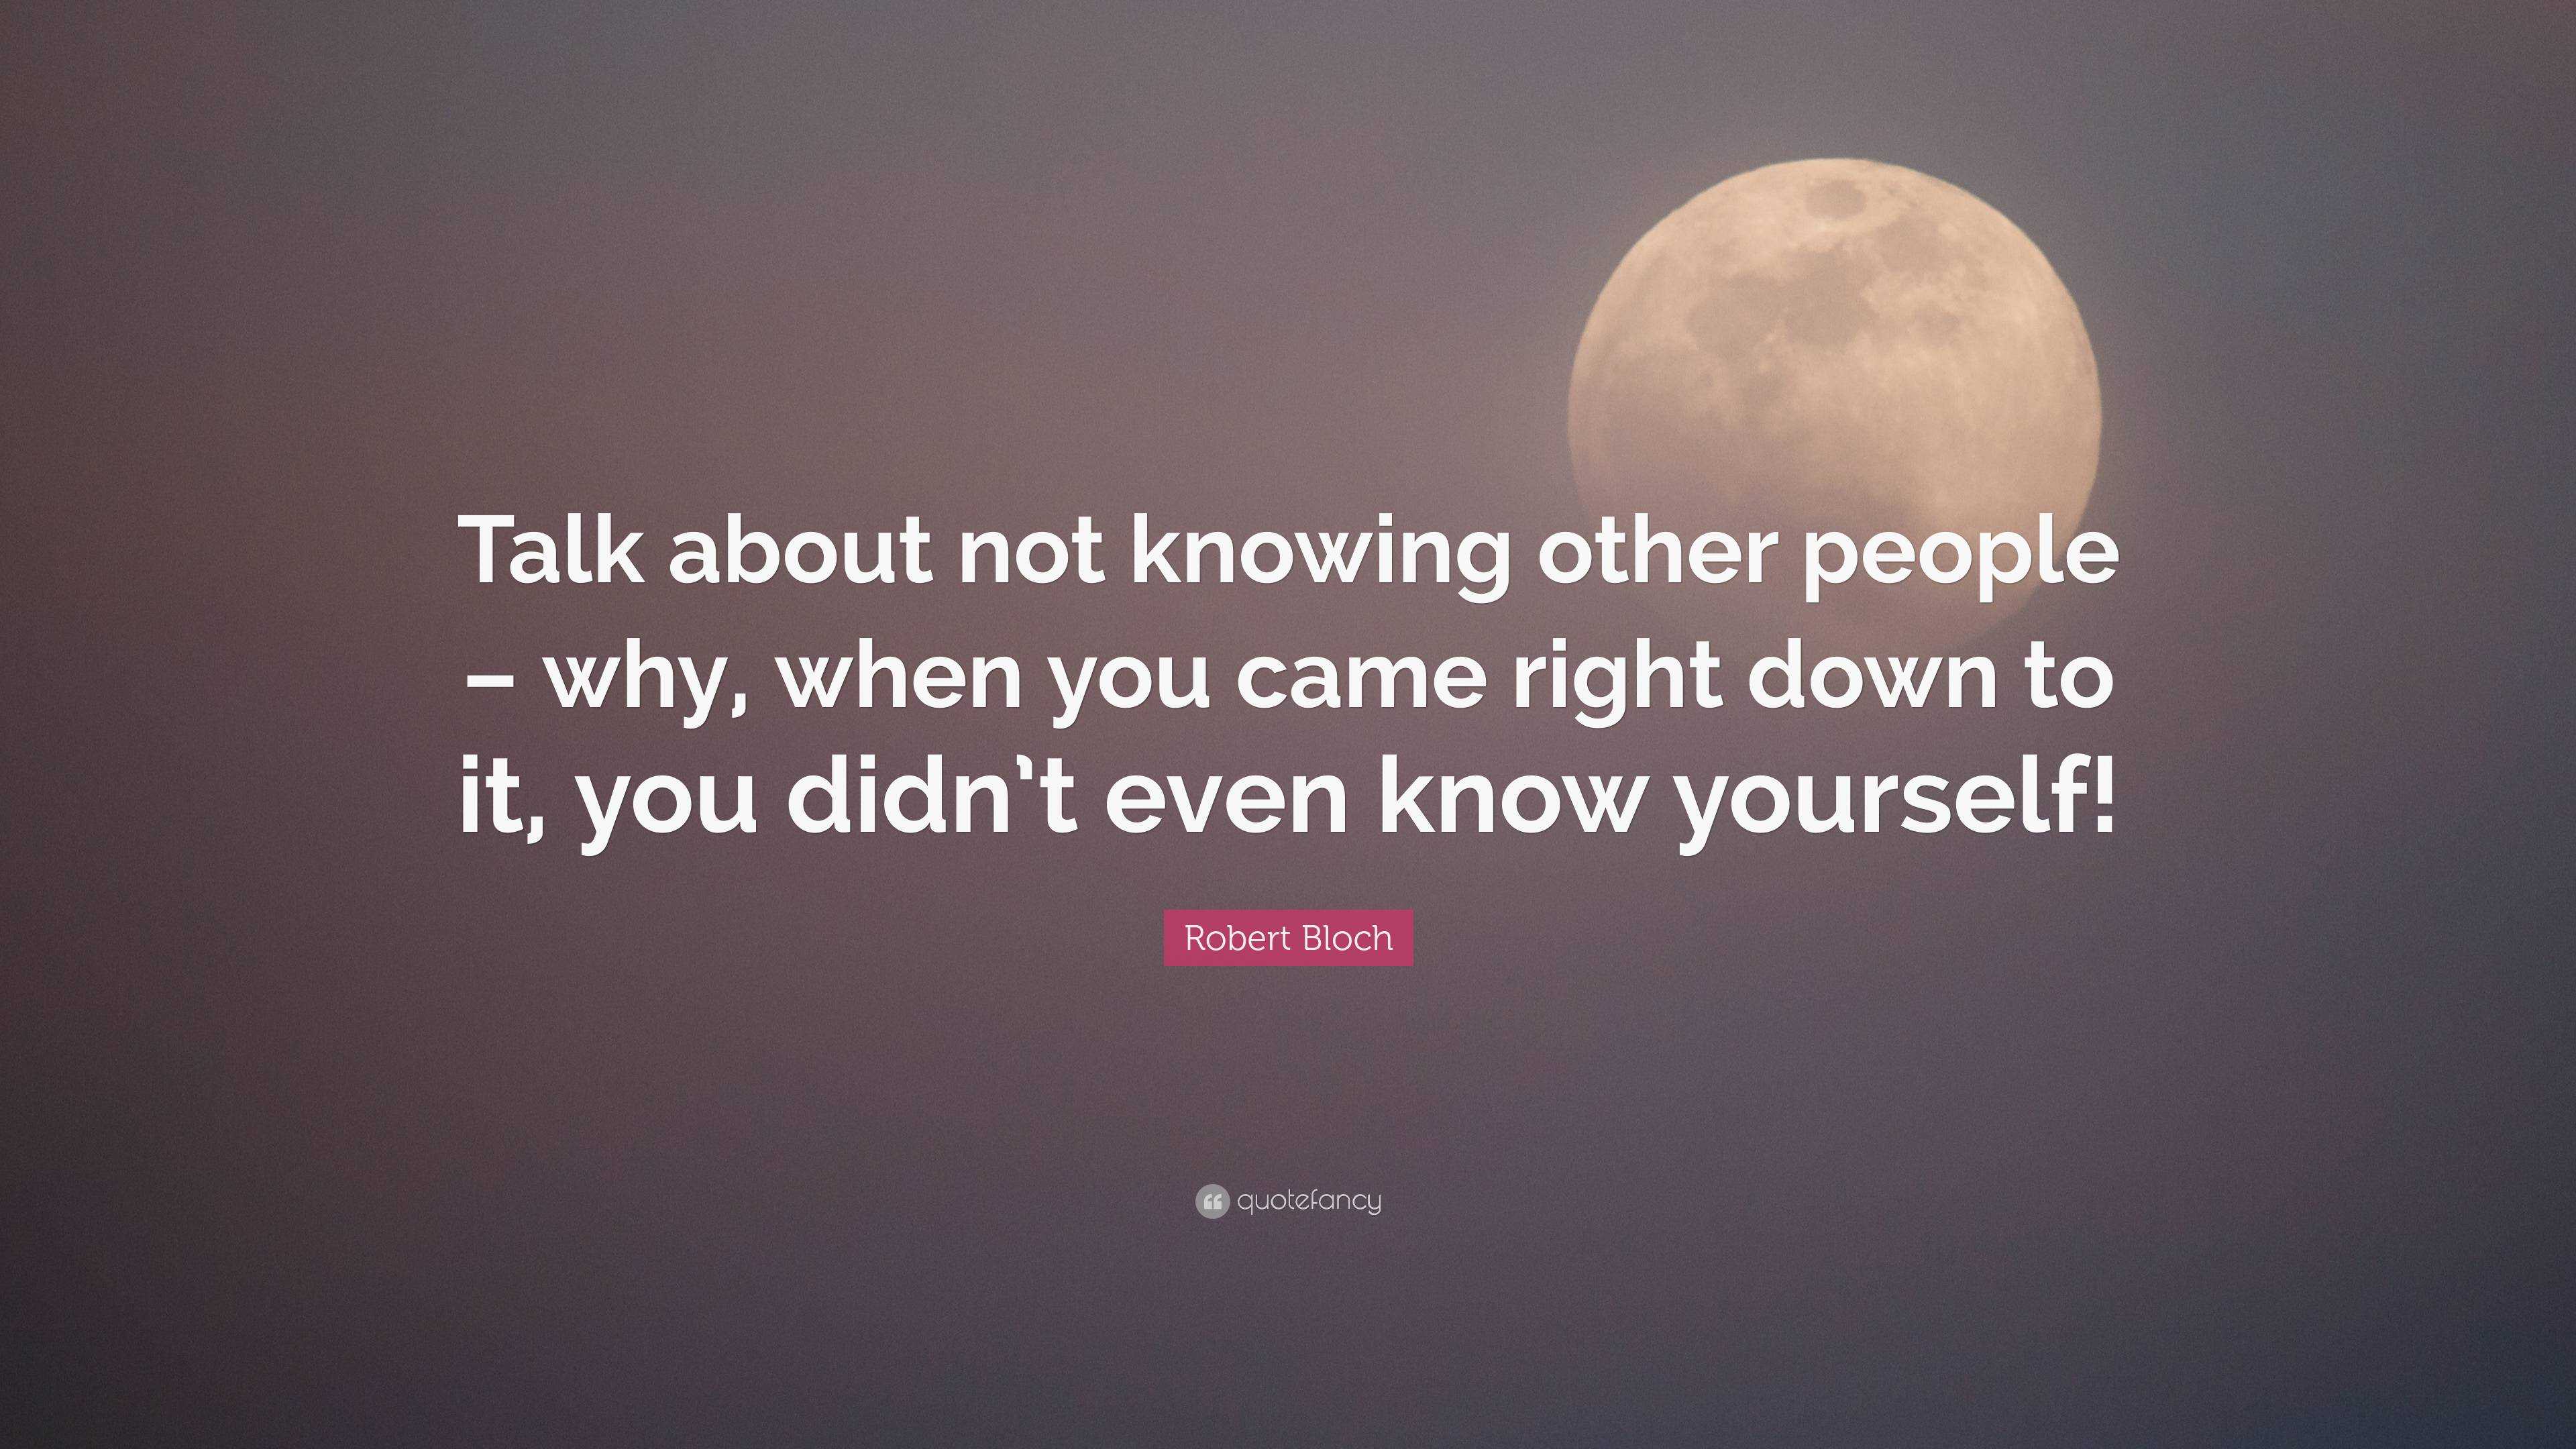 Robert Bloch Quote: “Talk about not knowing other people – why, when ...